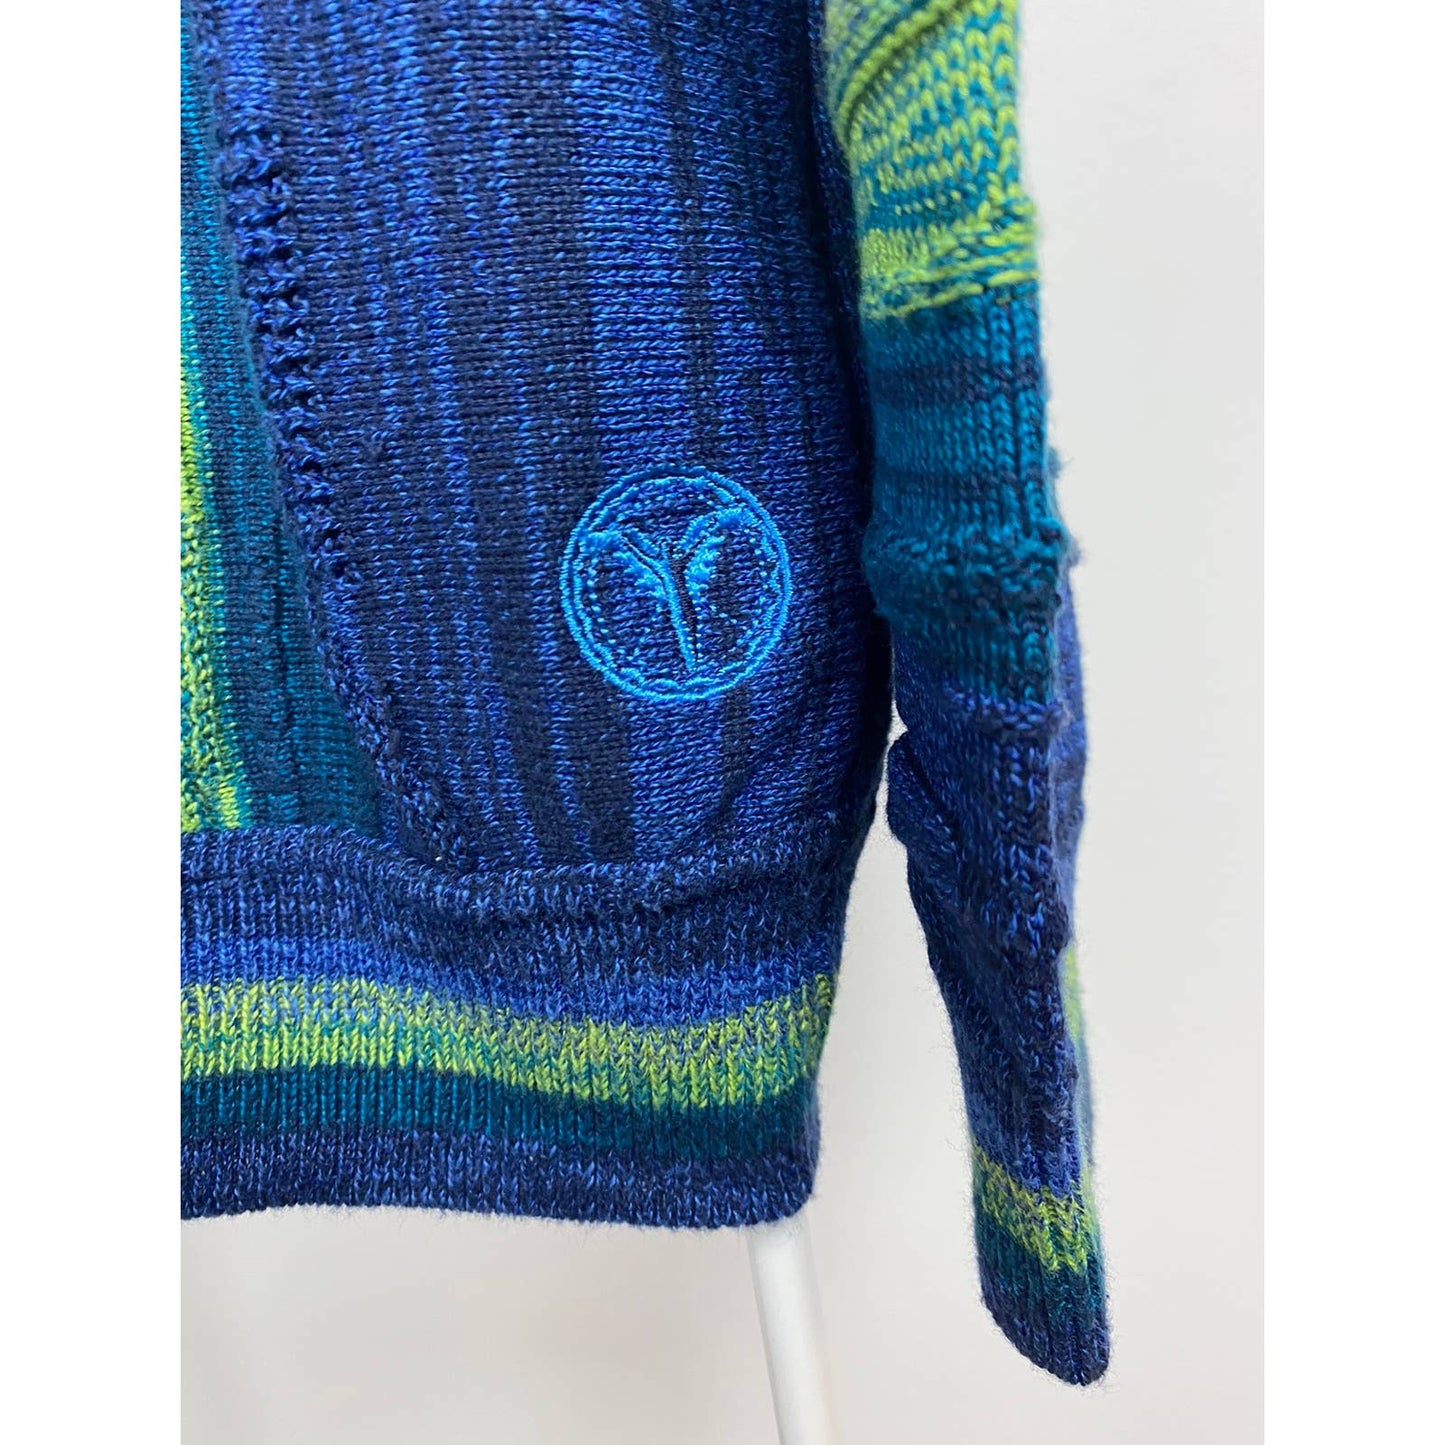 Carlo Colucci vintage blue sweater cable knit Coogi style